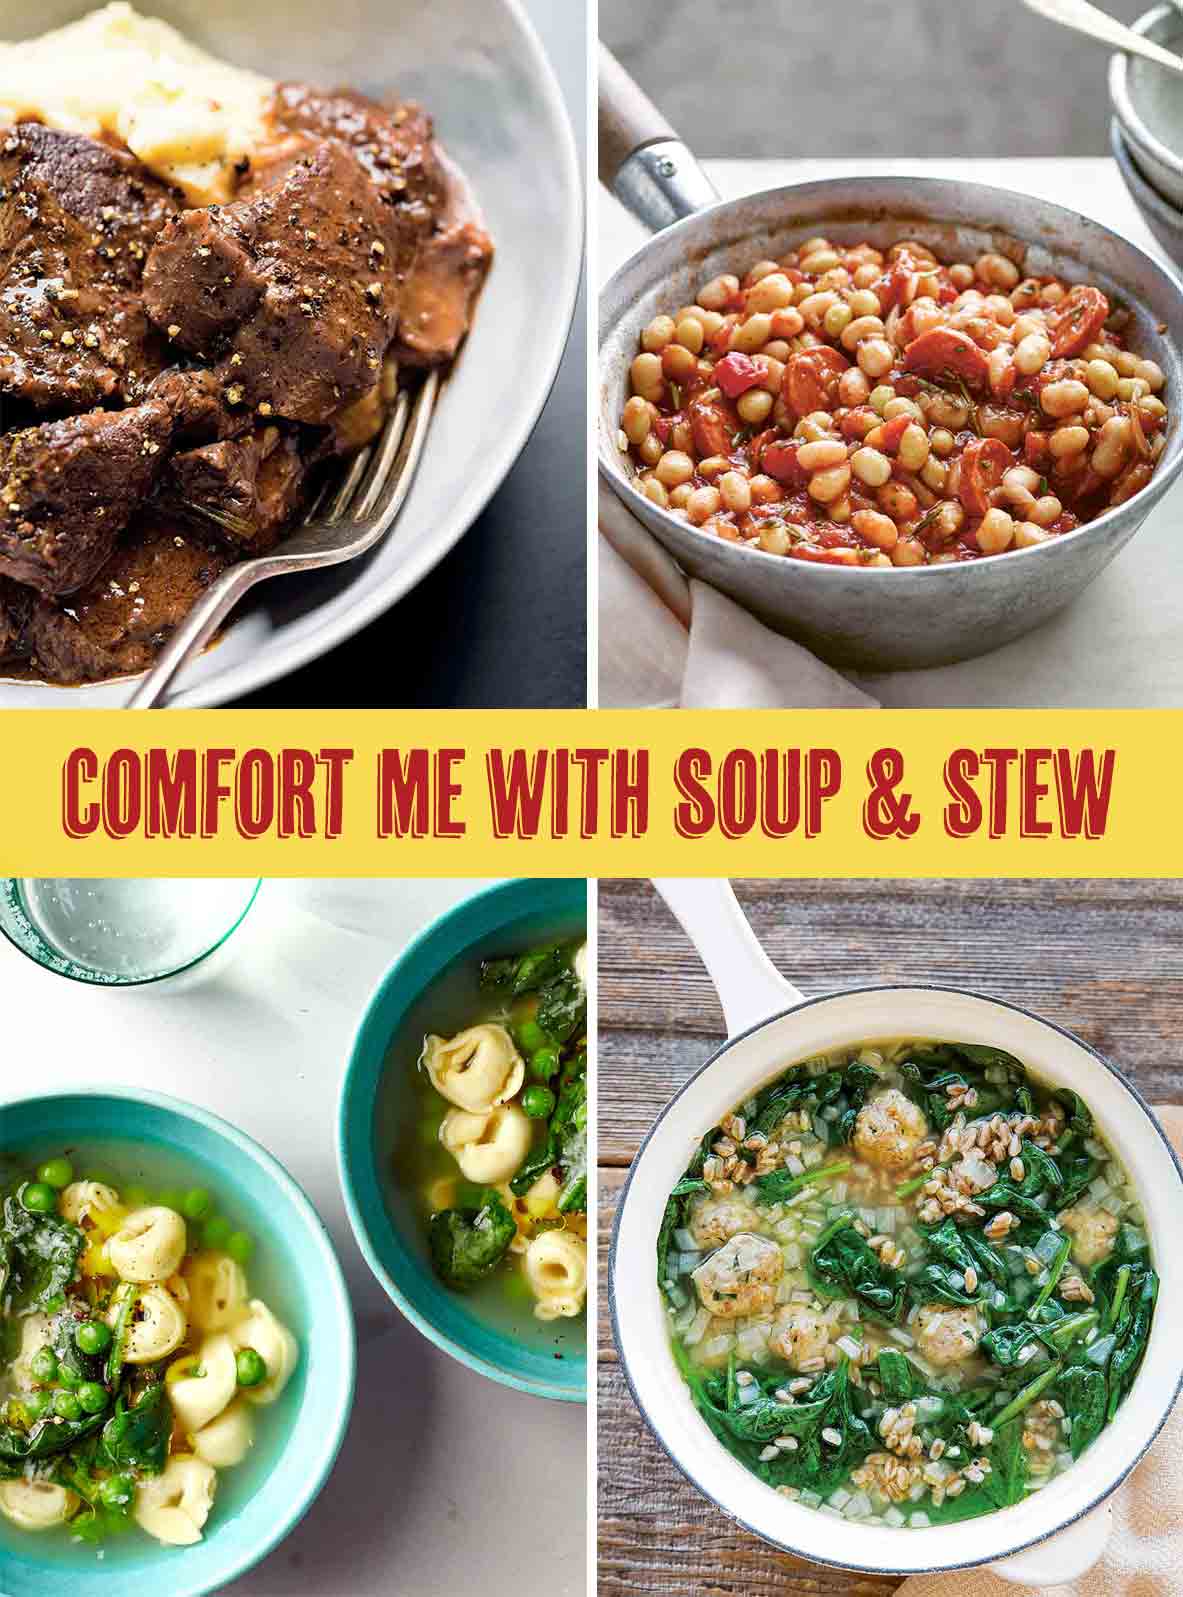 A plate of beef stew, a bowl of beans, a bow of tortellini soup, a pot of turkey meatball soup. The title reads: "Comfort me with soup and stew."